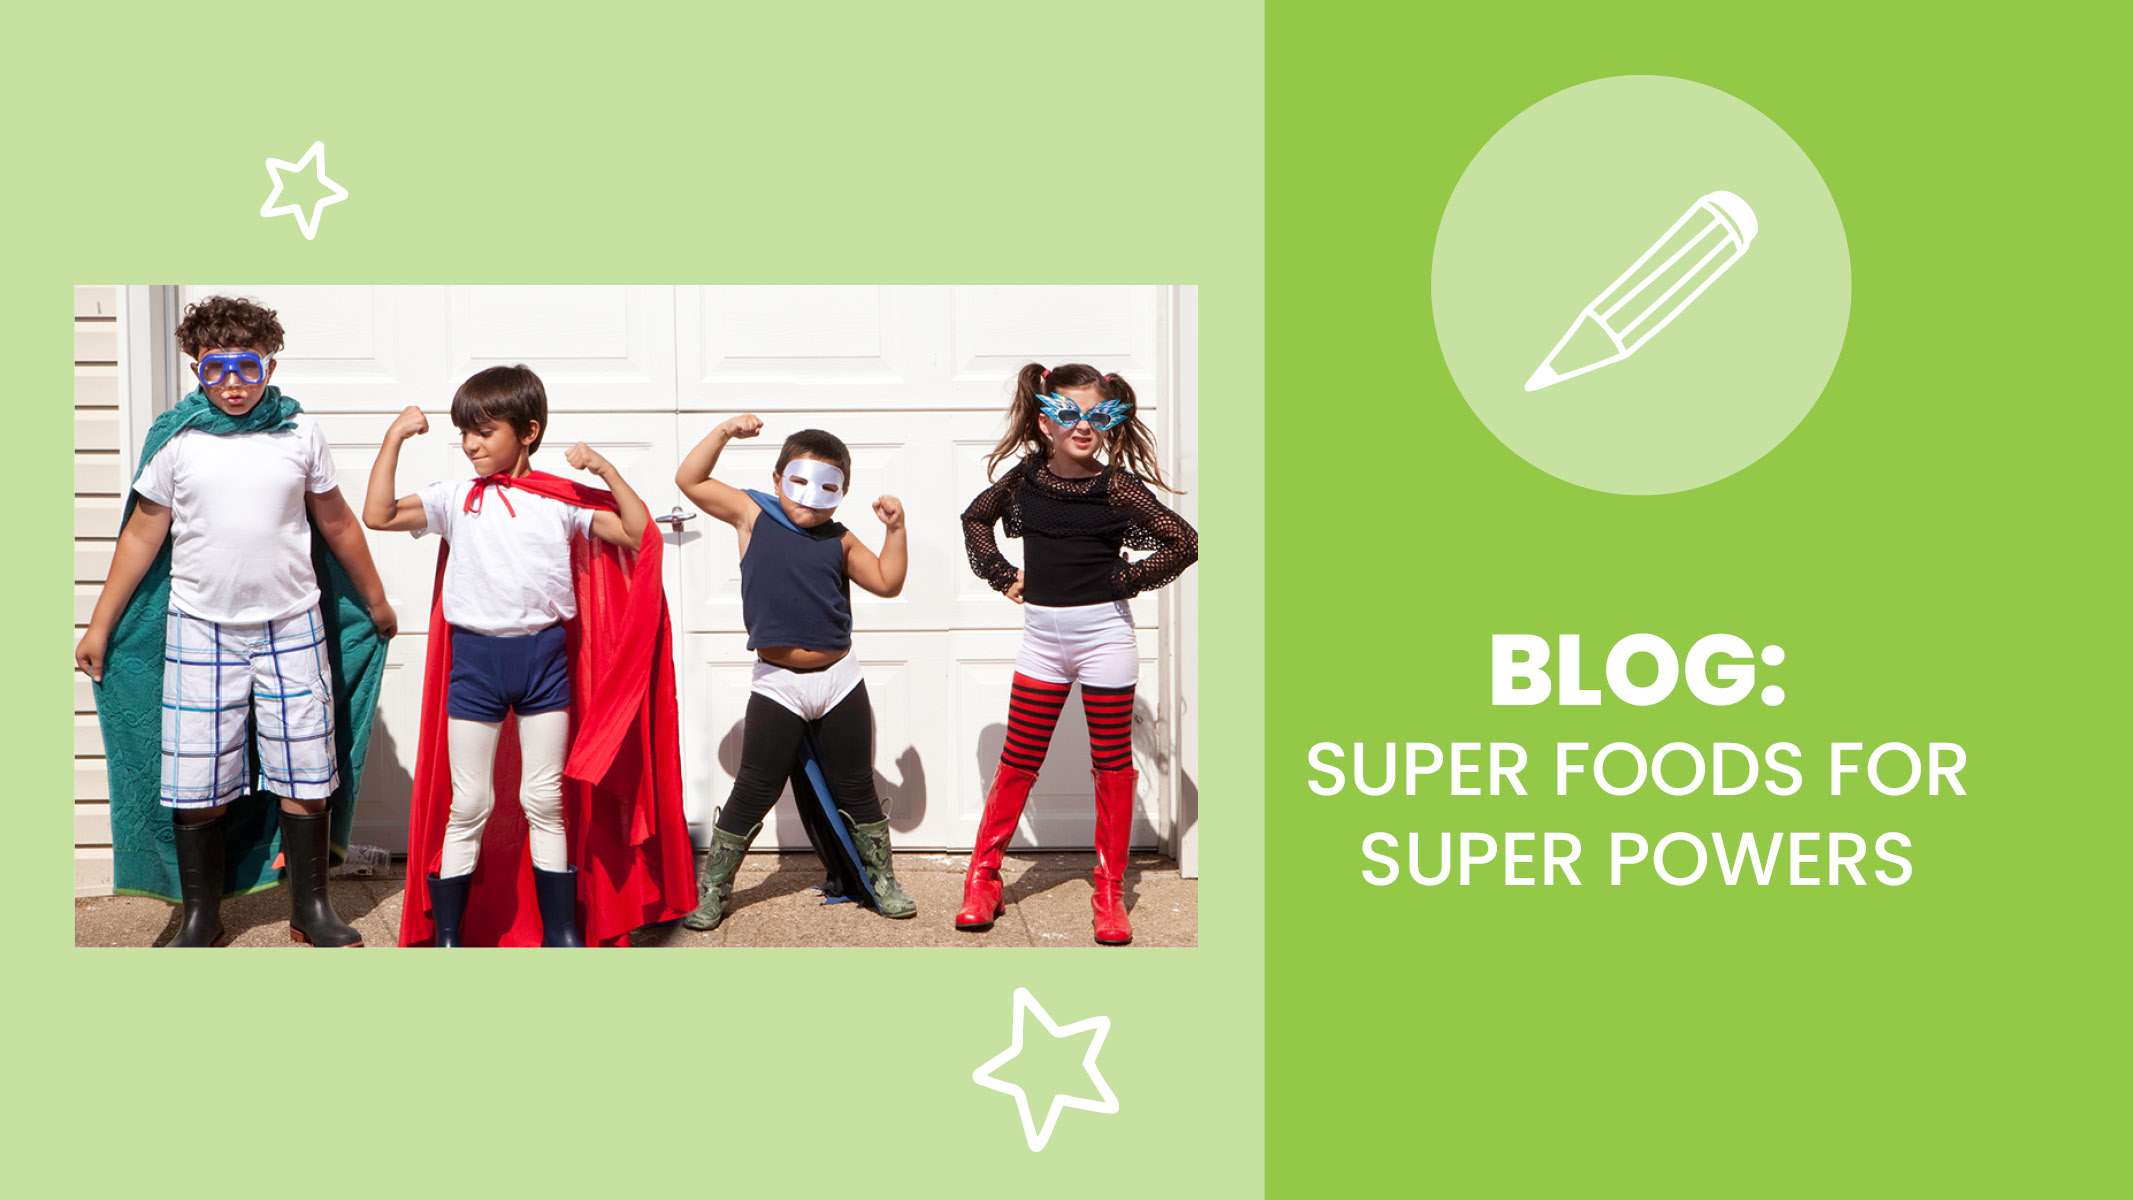 Group of young kids dress as super heroes after eating super foods